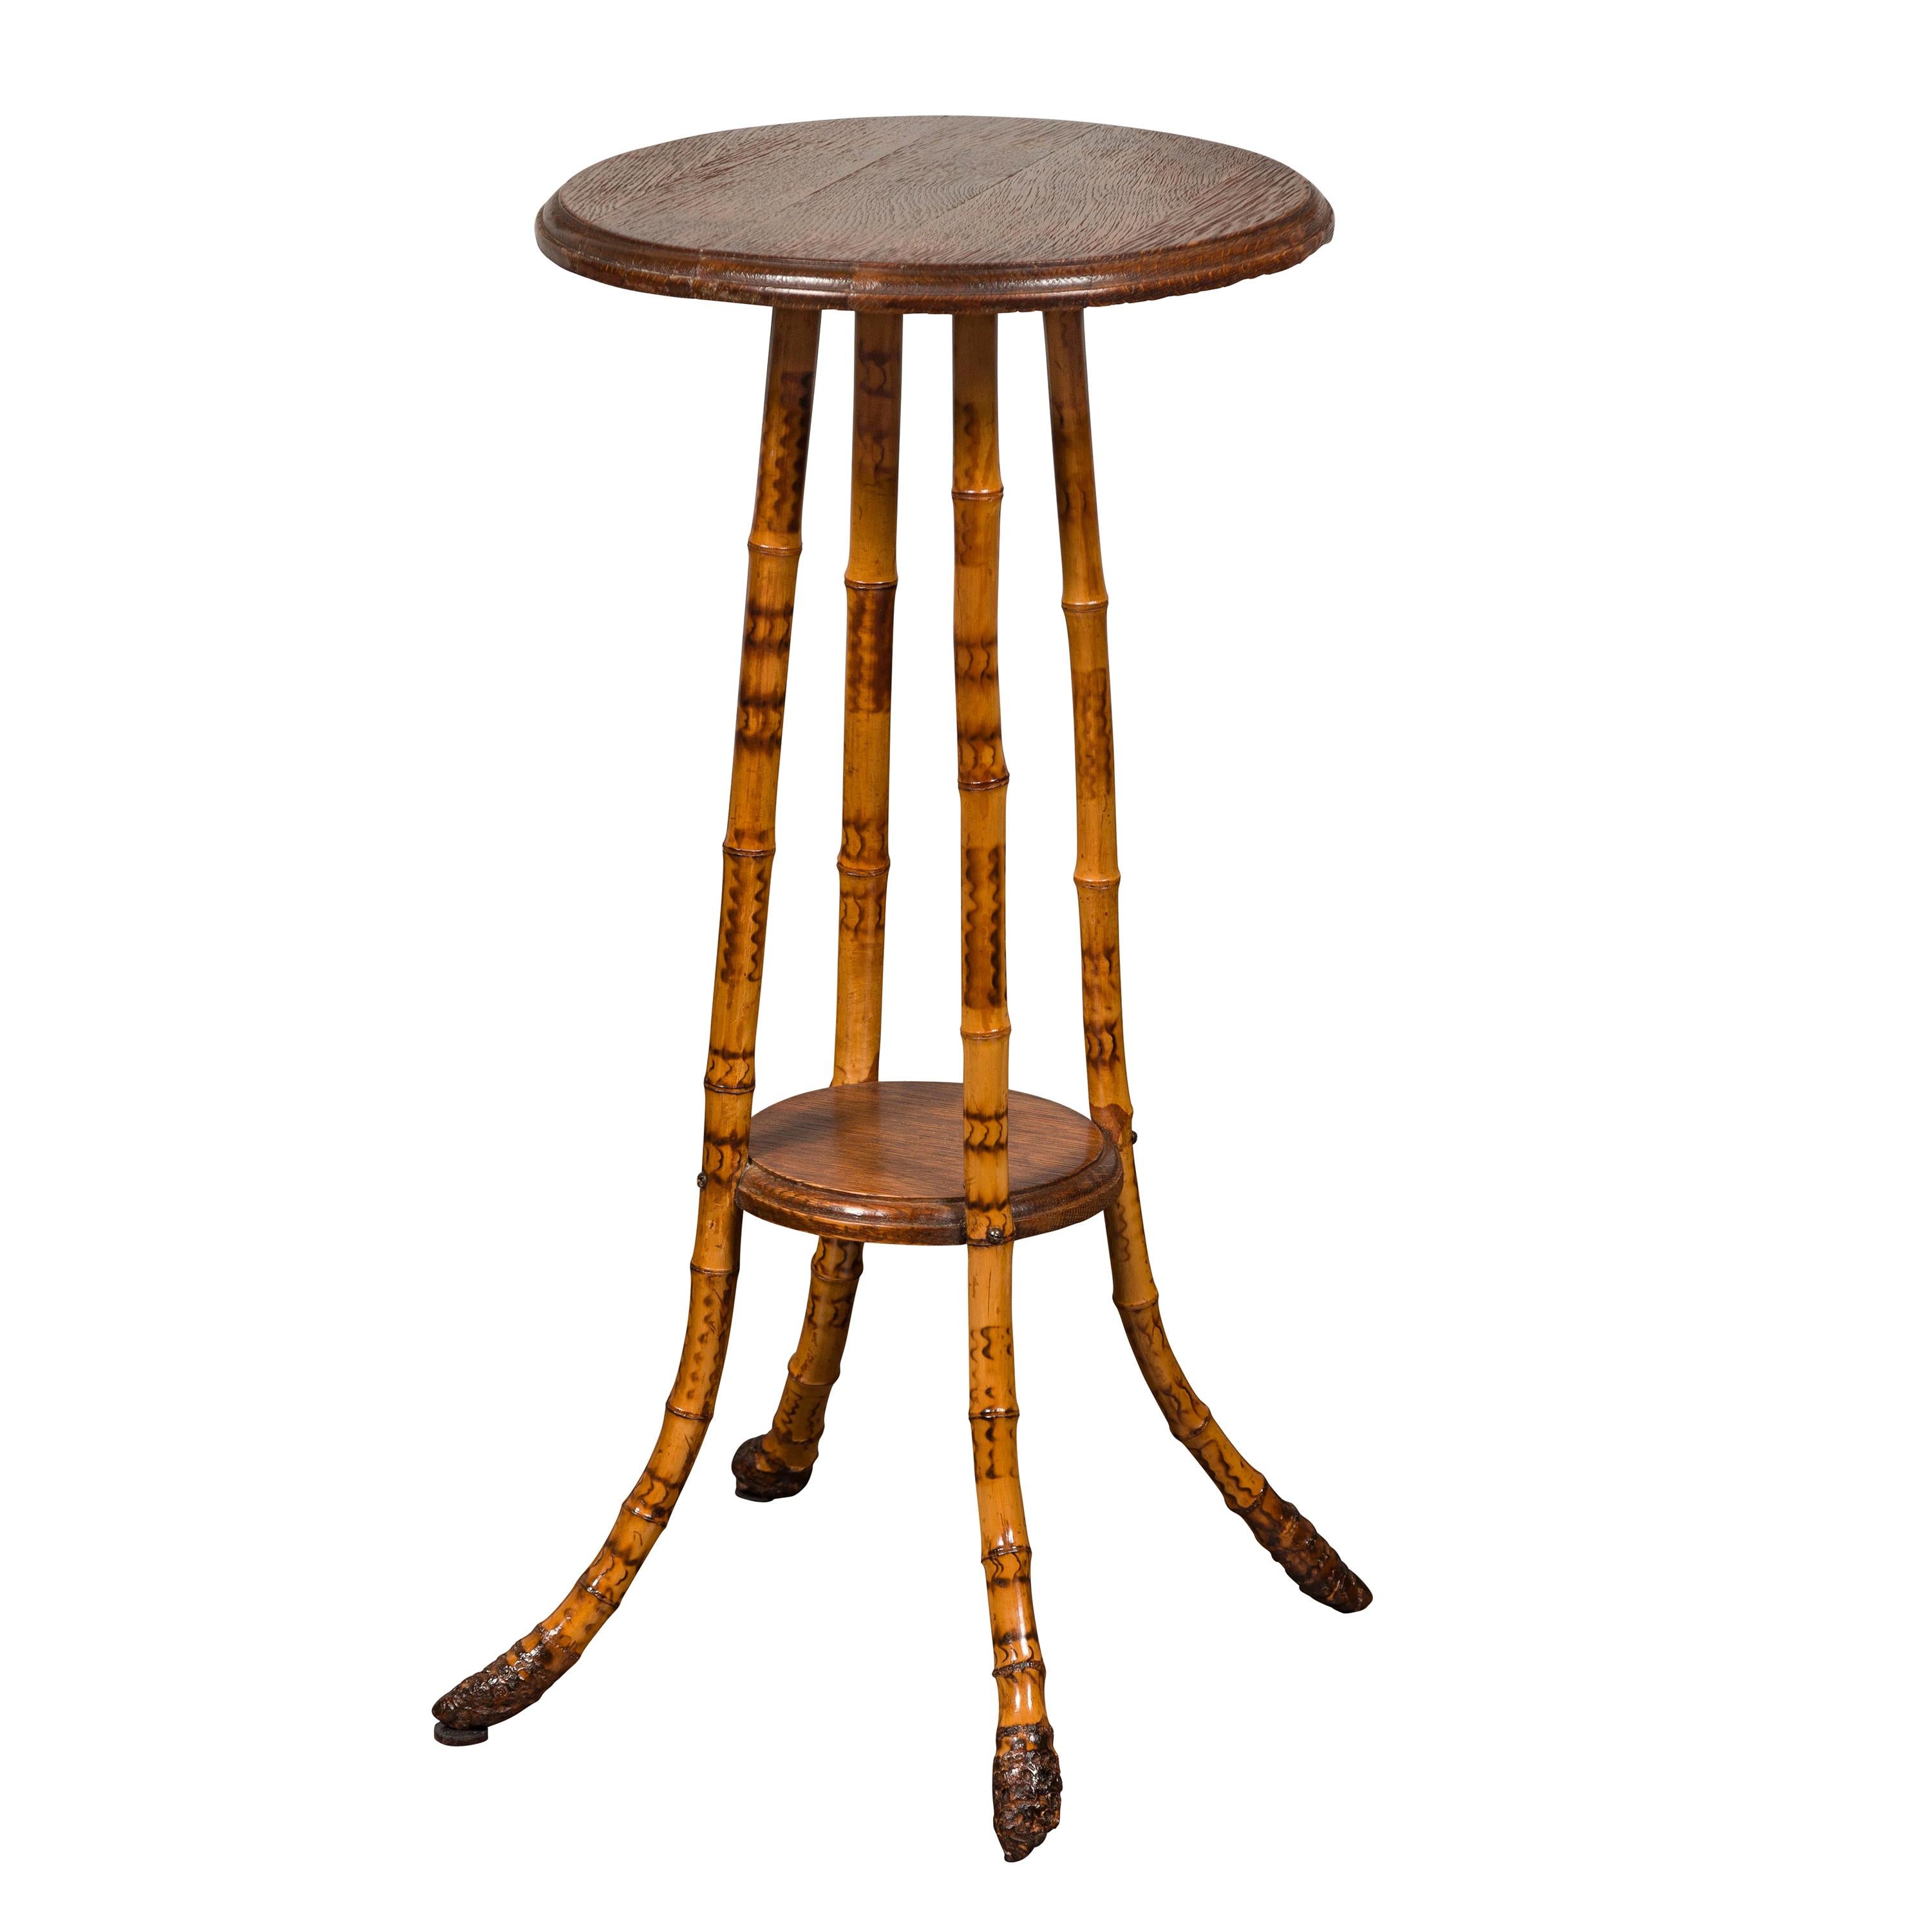 English 1890s Bamboo Side Table with Circular Wooden Top and Lower Shelf